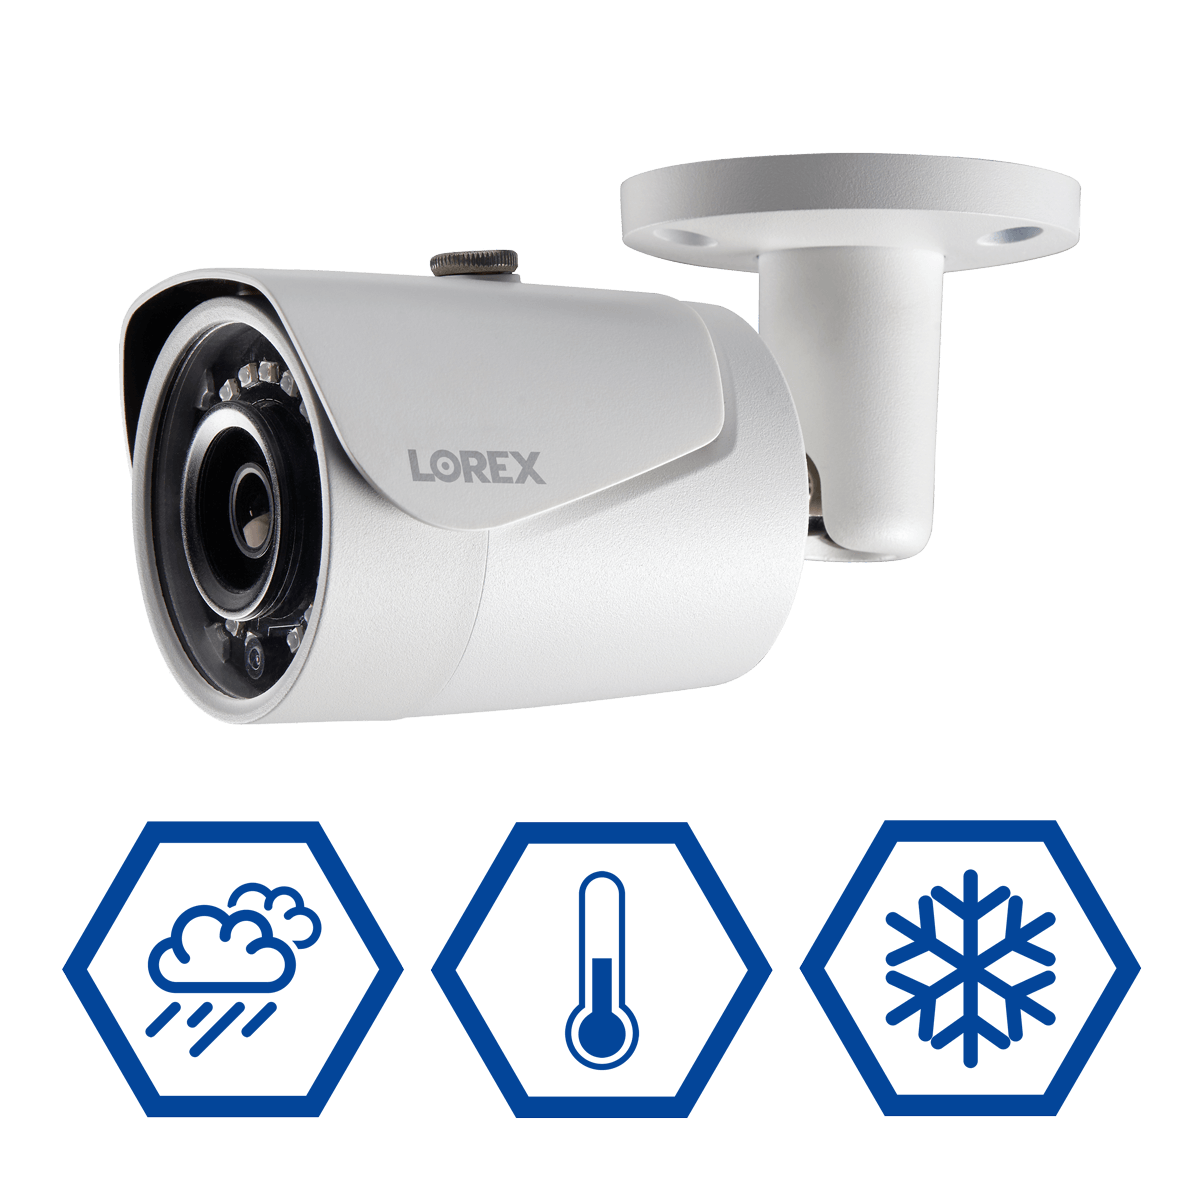 4K weatherproof security camera for year-round protection